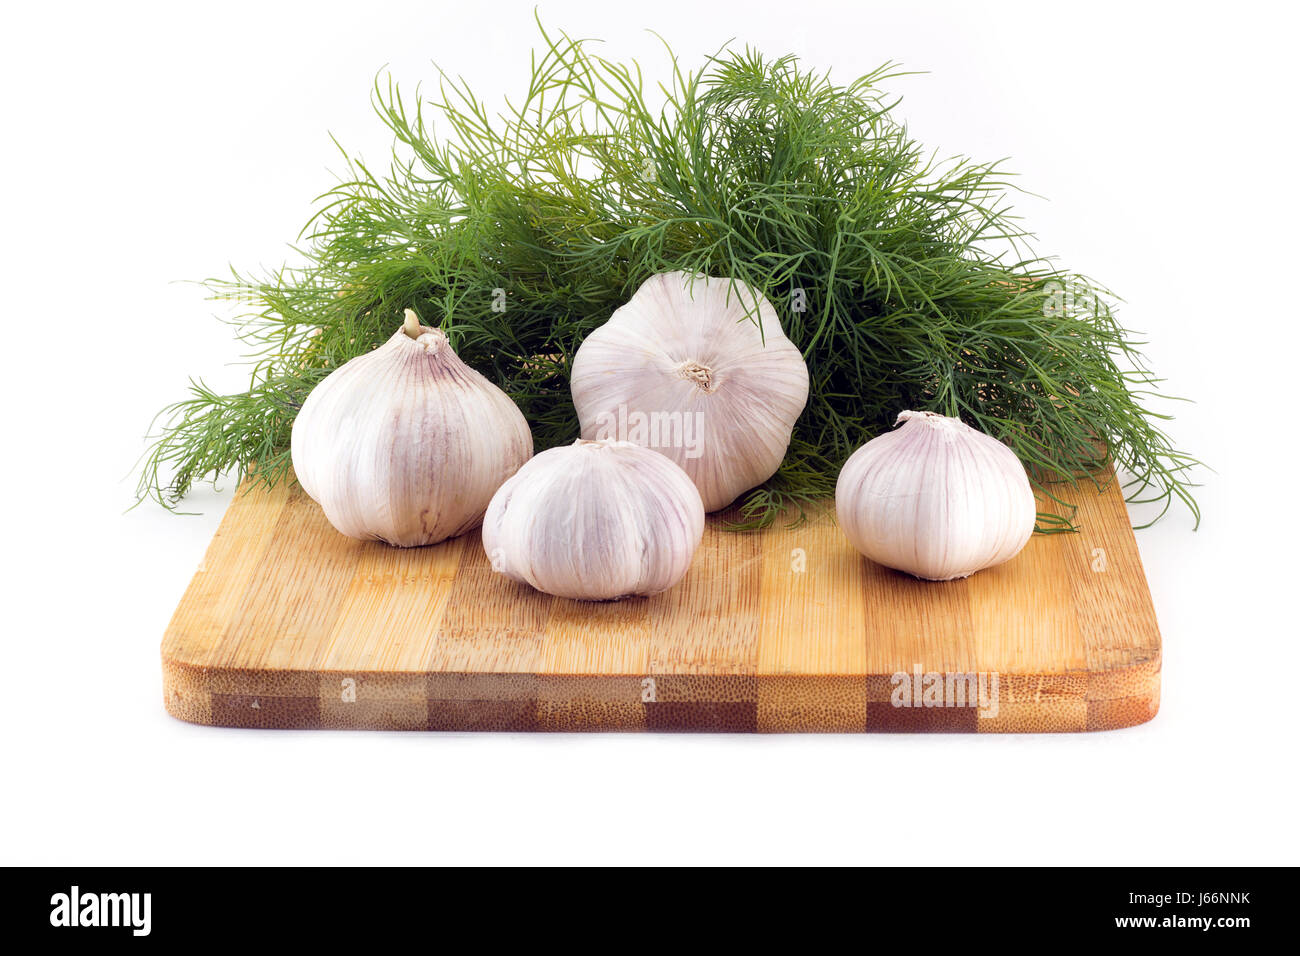 Four bulbs of garlic on a wooden substrate and a bunch of dill on a background isolated on a white background Stock Photo